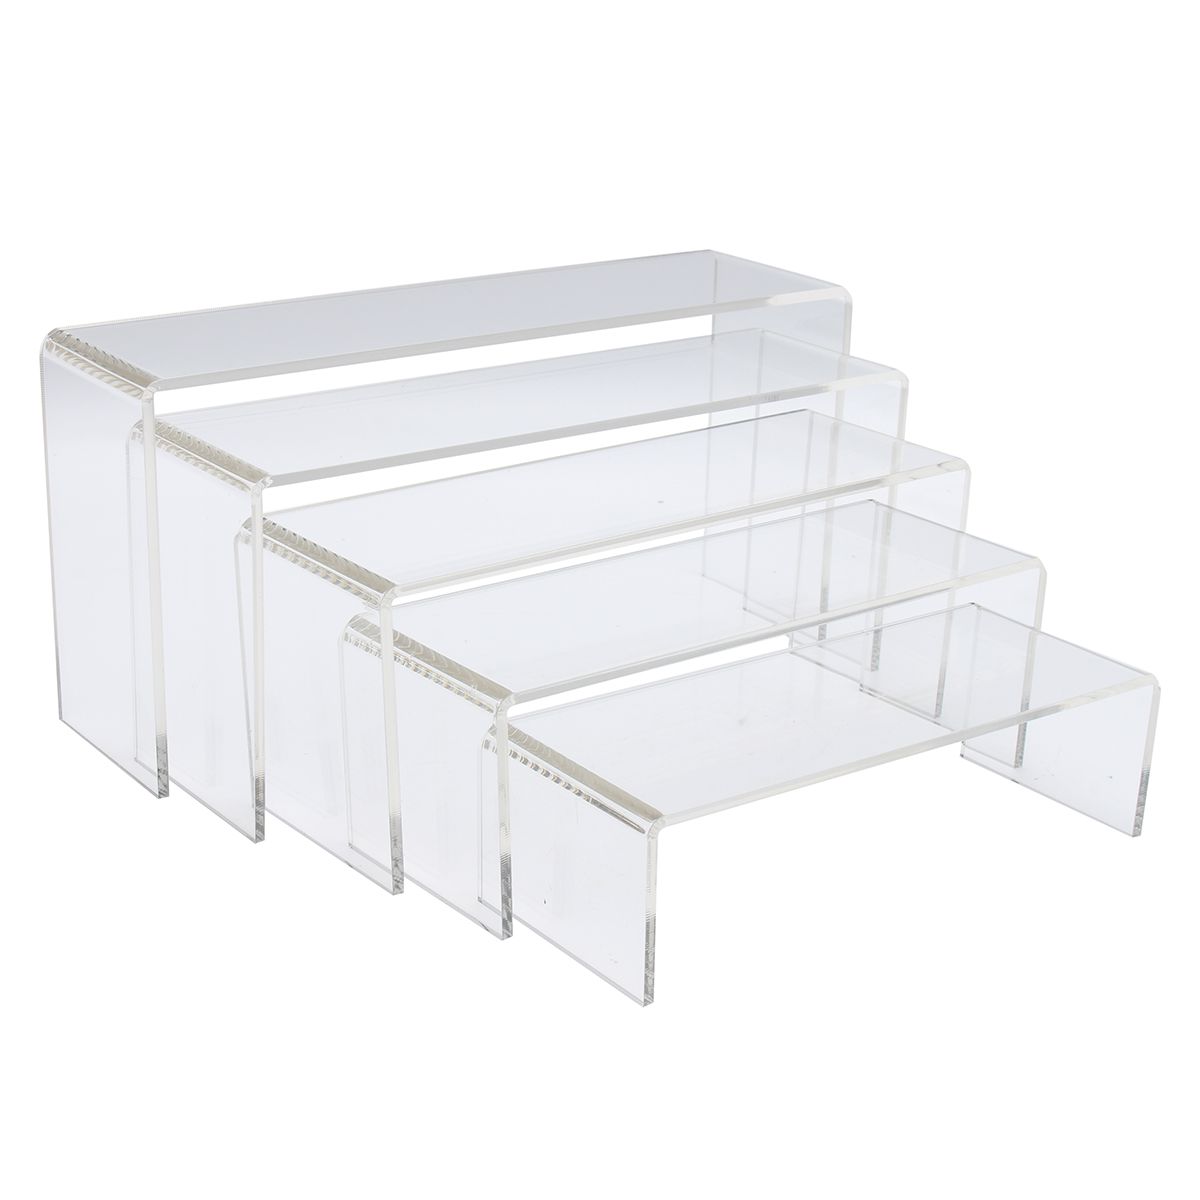 5Pcs-Clear-Acrylic-Perspex-Sturdy-Jewelry-Cupcake-Dessert-Display-Riser-Stand-Showcase-Decorations-1382269